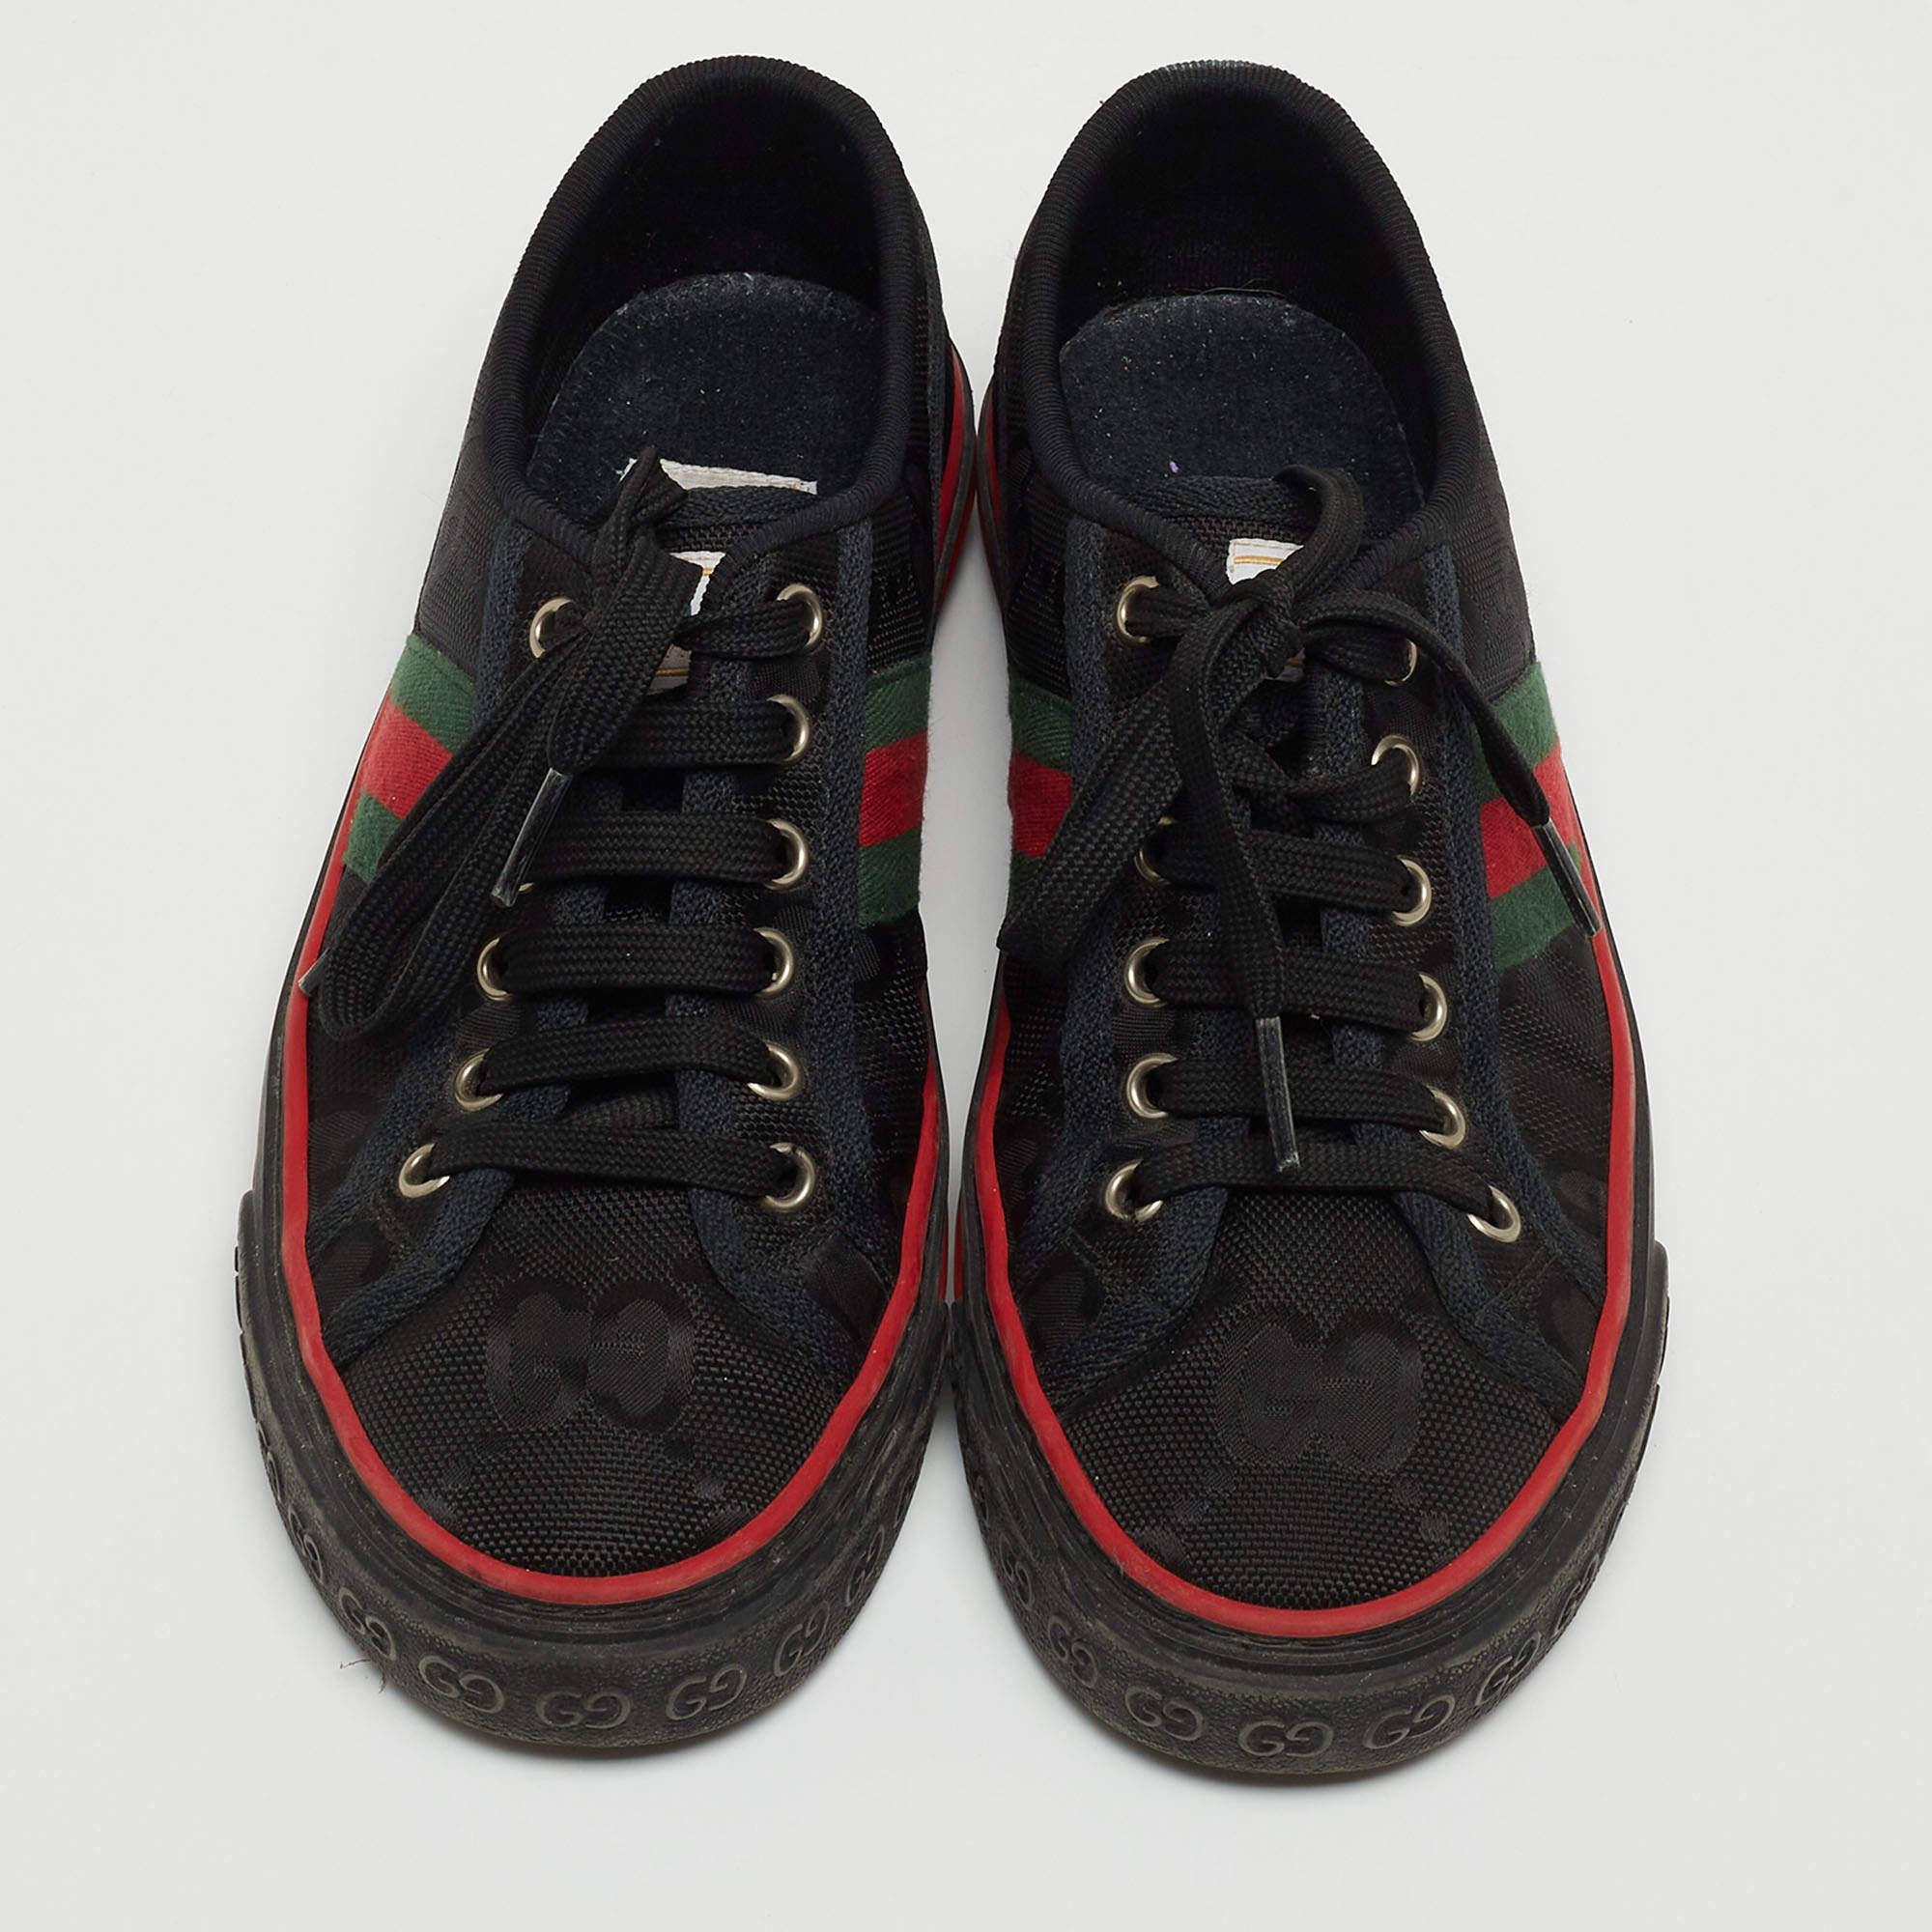 Gucci Black GG Canvas Tennis 1977 Sneakers Size 36 4